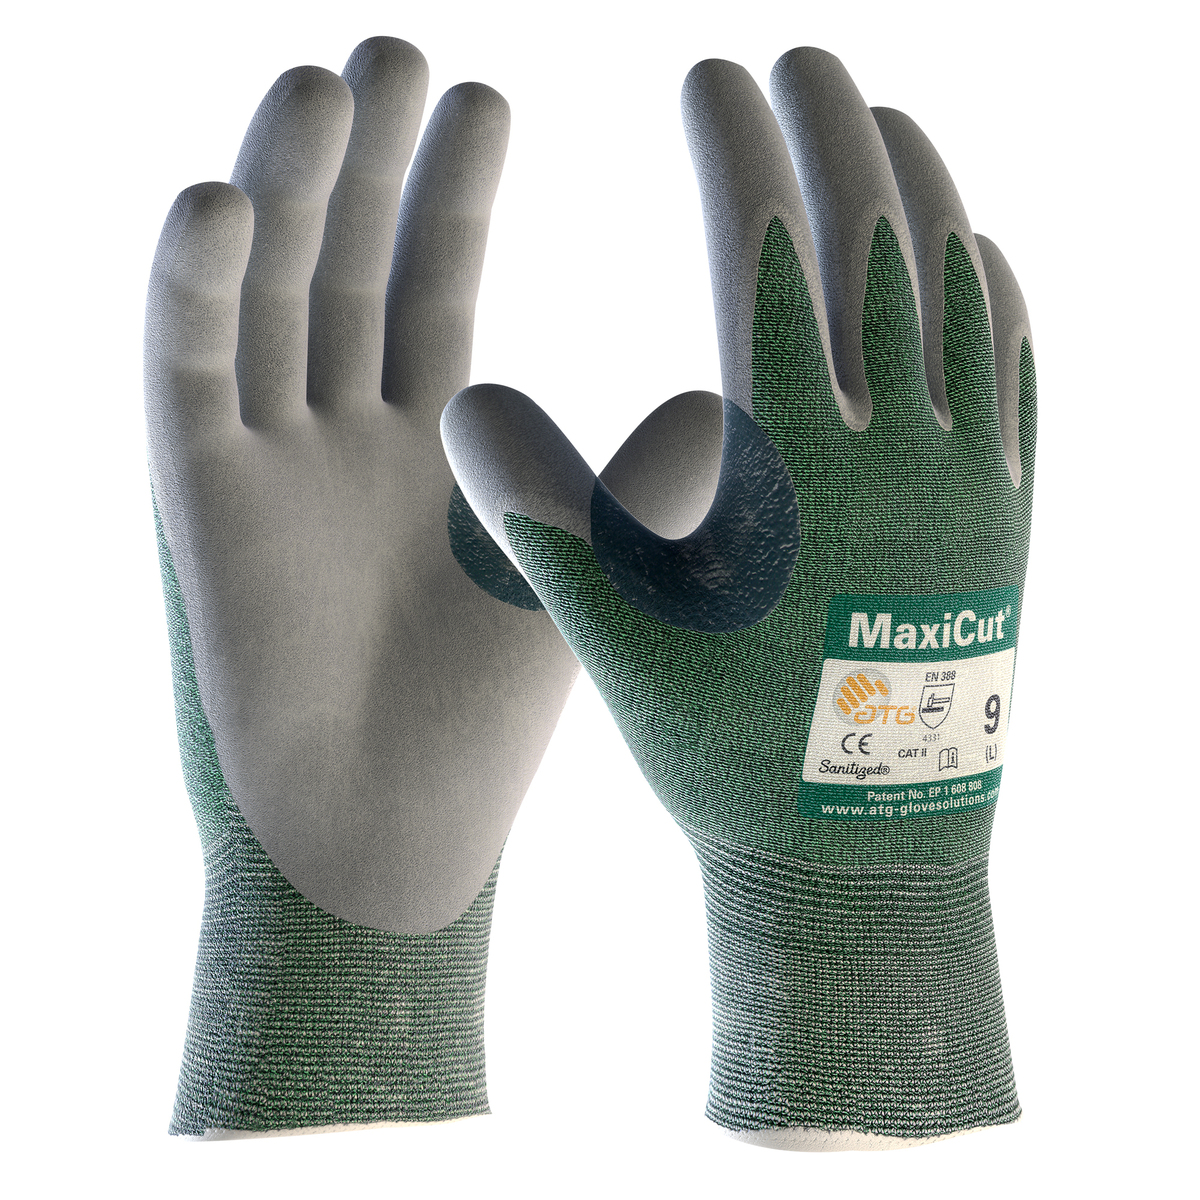 PIP® 3X MaxiCut® 15 Gauge Engineered Yarn Cut Resistant Gloves With Nitrile Coating